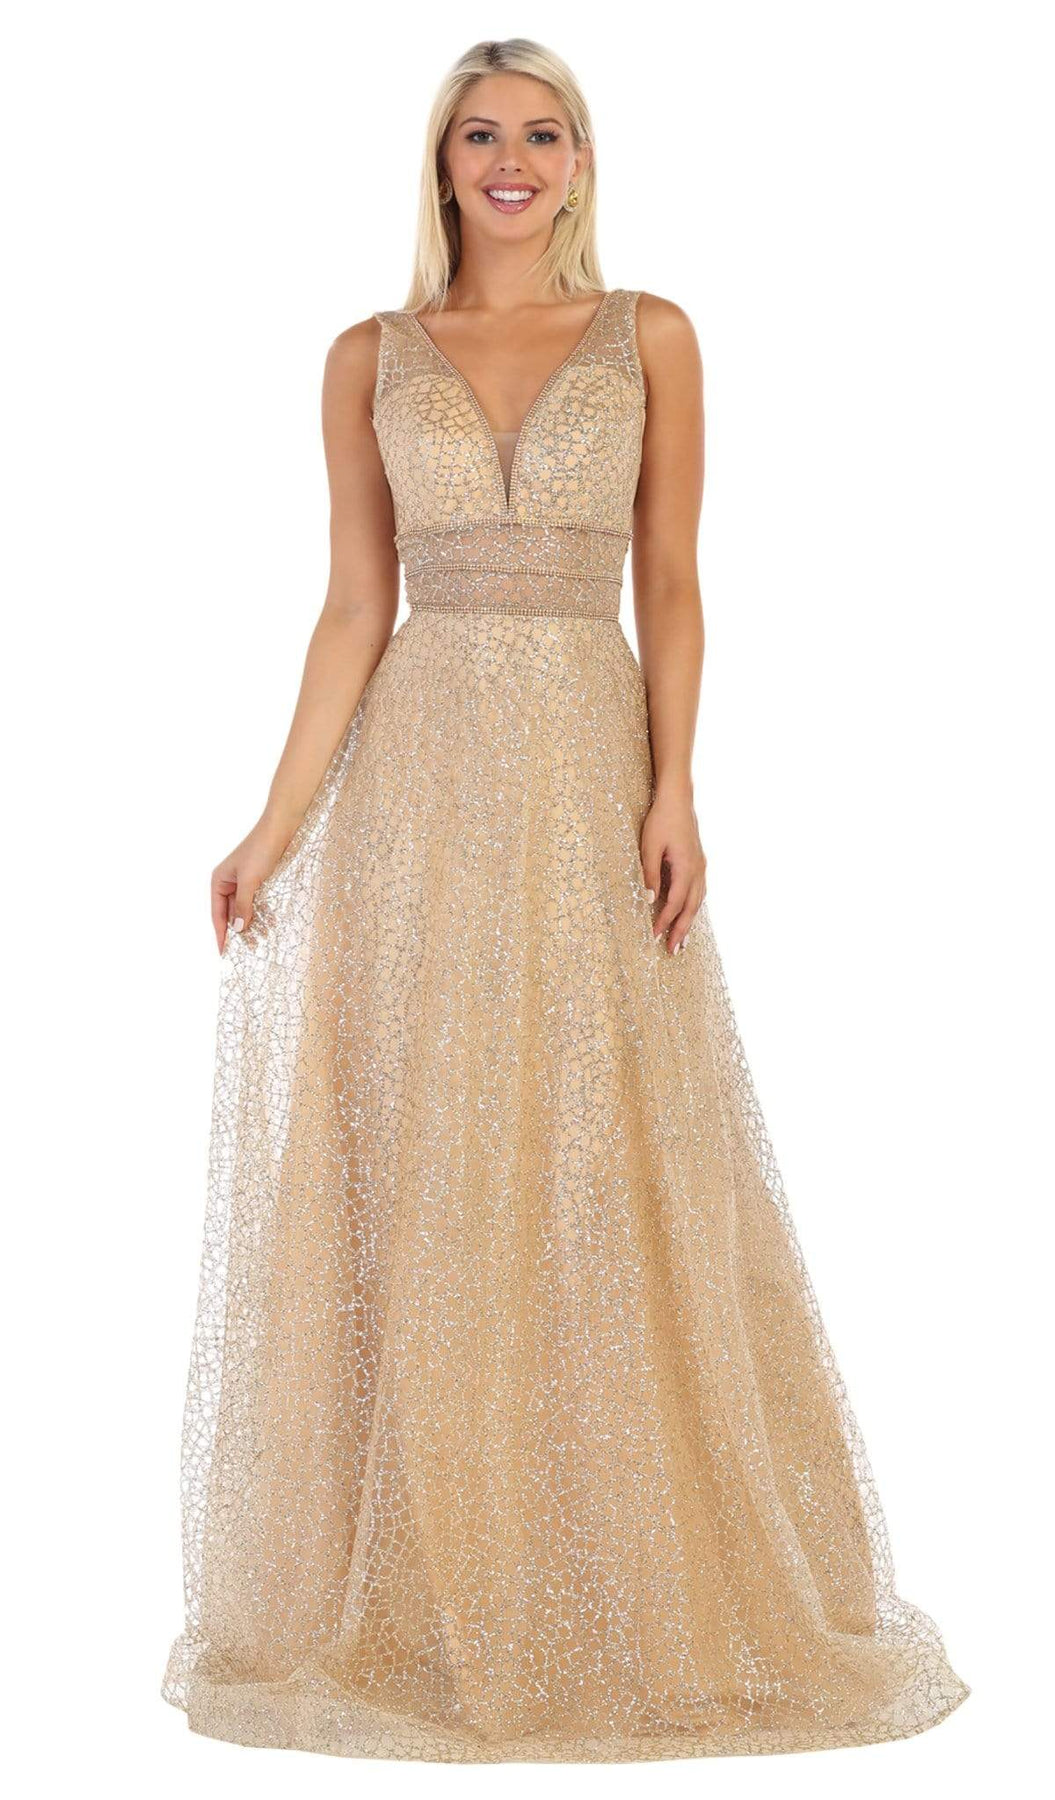 May Queen - MQ-1623 Sleeveless V-Neck Glitter Tulle A-Line Gown Special Occasion Dress 2 / Gold